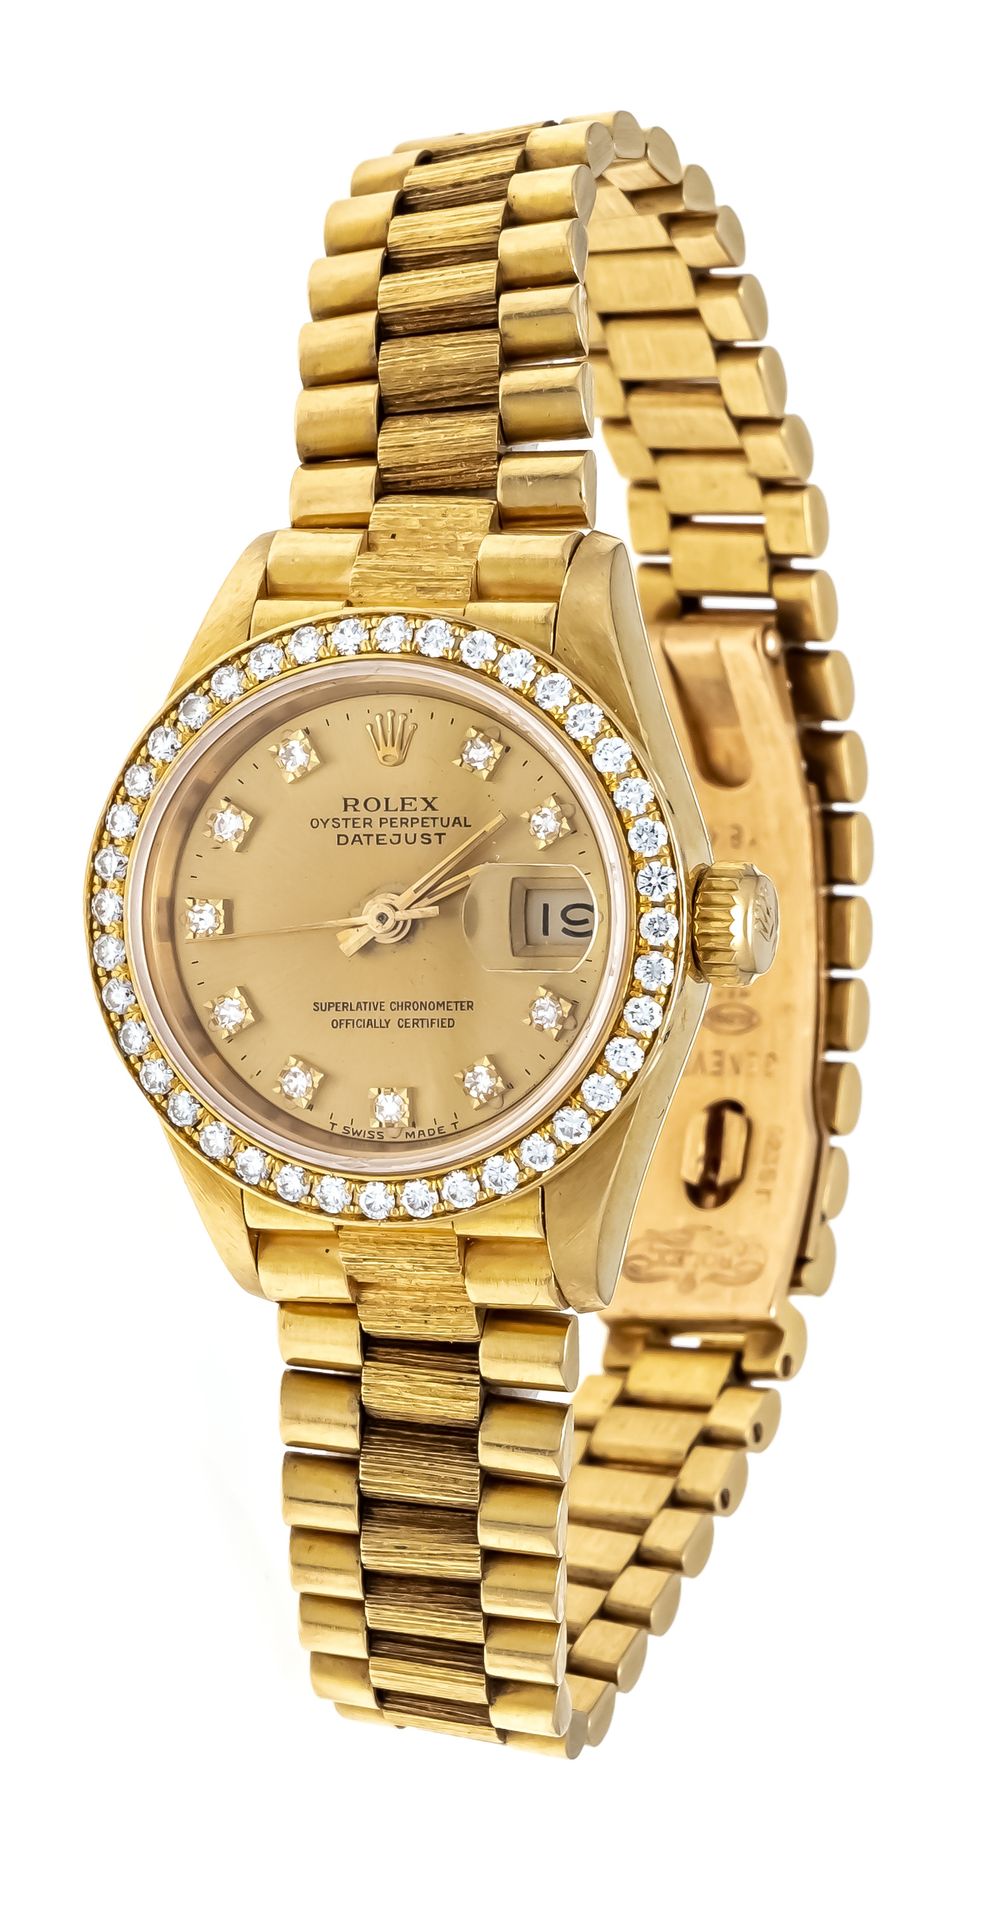 Null Rolex Oyster Perpetual GG 750/000 con 41 diamantes aprox. 0,41ct. Ref. 6927&hellip;